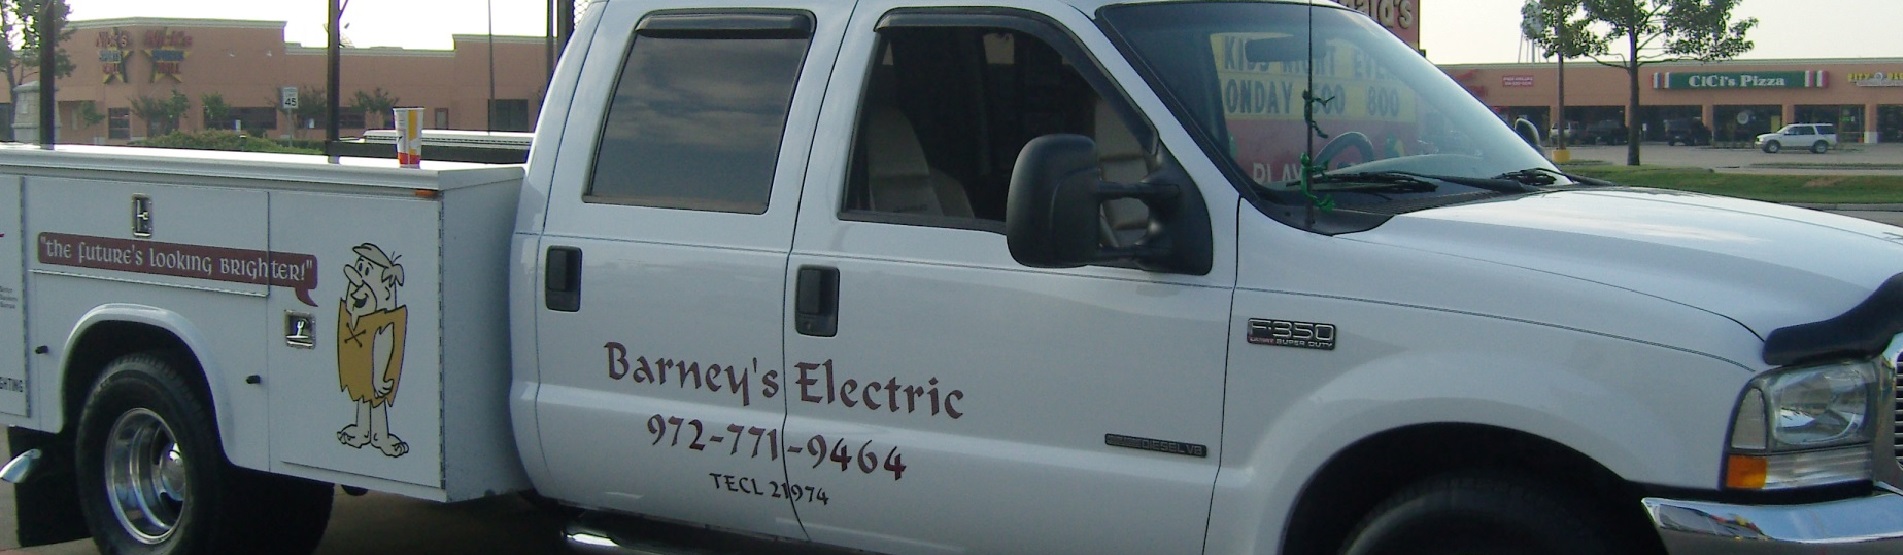 remodel electrician heath texas, remodeling electrician heath texas, electrical remodel heath texas, electrical remodeling heath texas, electrical remodeling contractor heath texas Electrician Rockwall TX Barney's Electric Full Service Electrician Residential Commercial Retail and New Construction Wiring Repair Installation Service 24 Hour Emergency Services Master Electrician Rockwall Texas